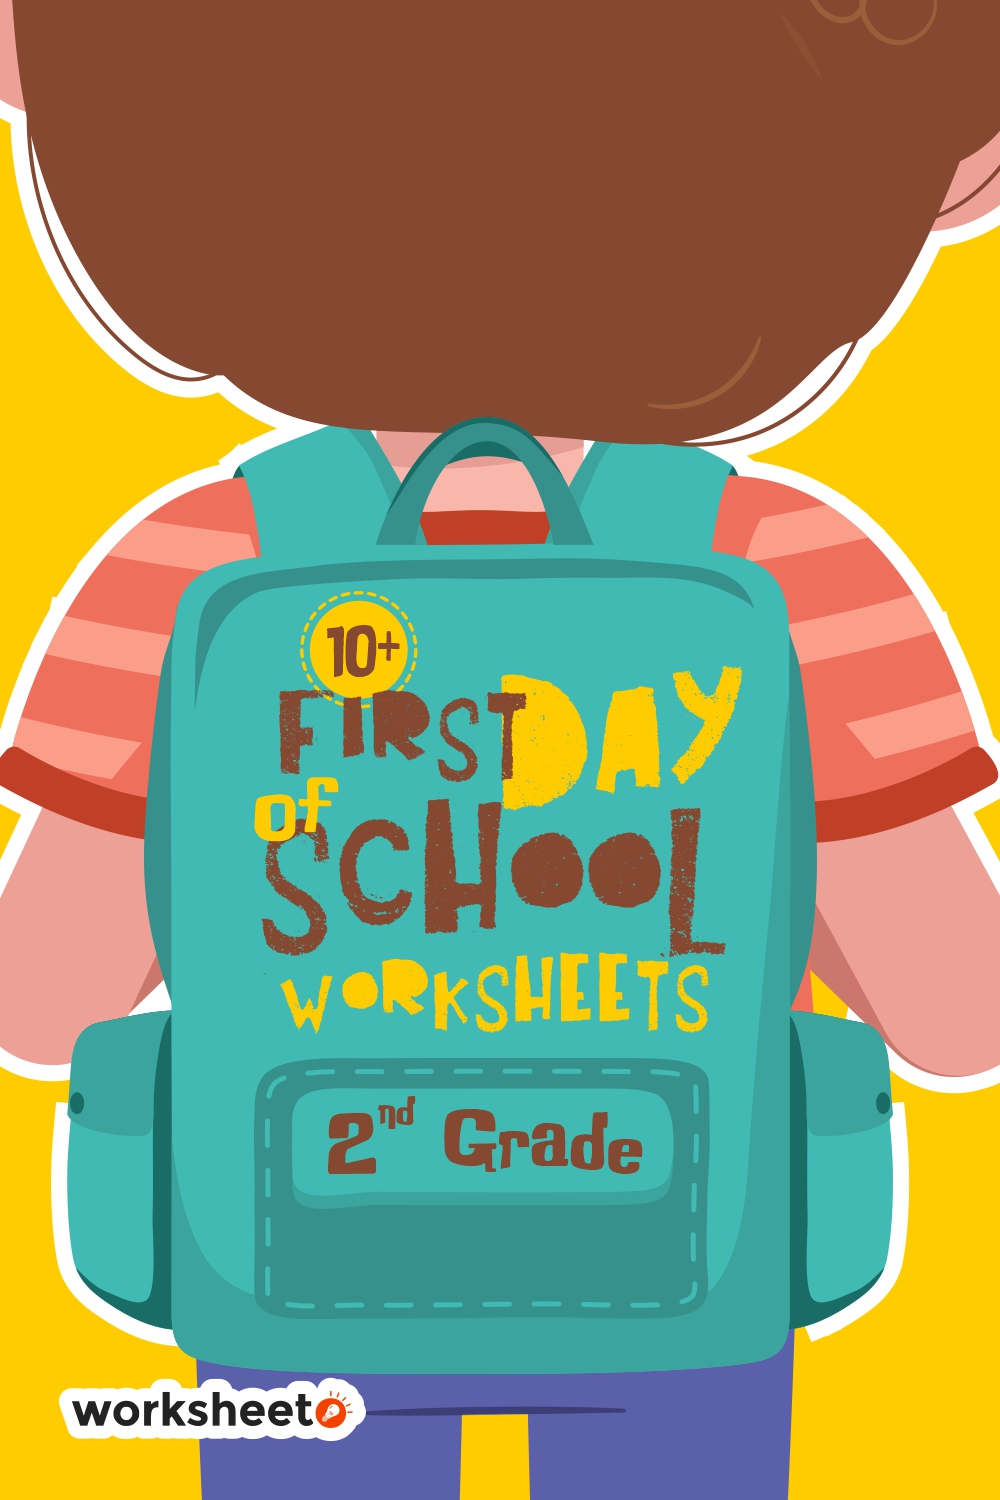 First Day of School Worksheets 2nd Grade